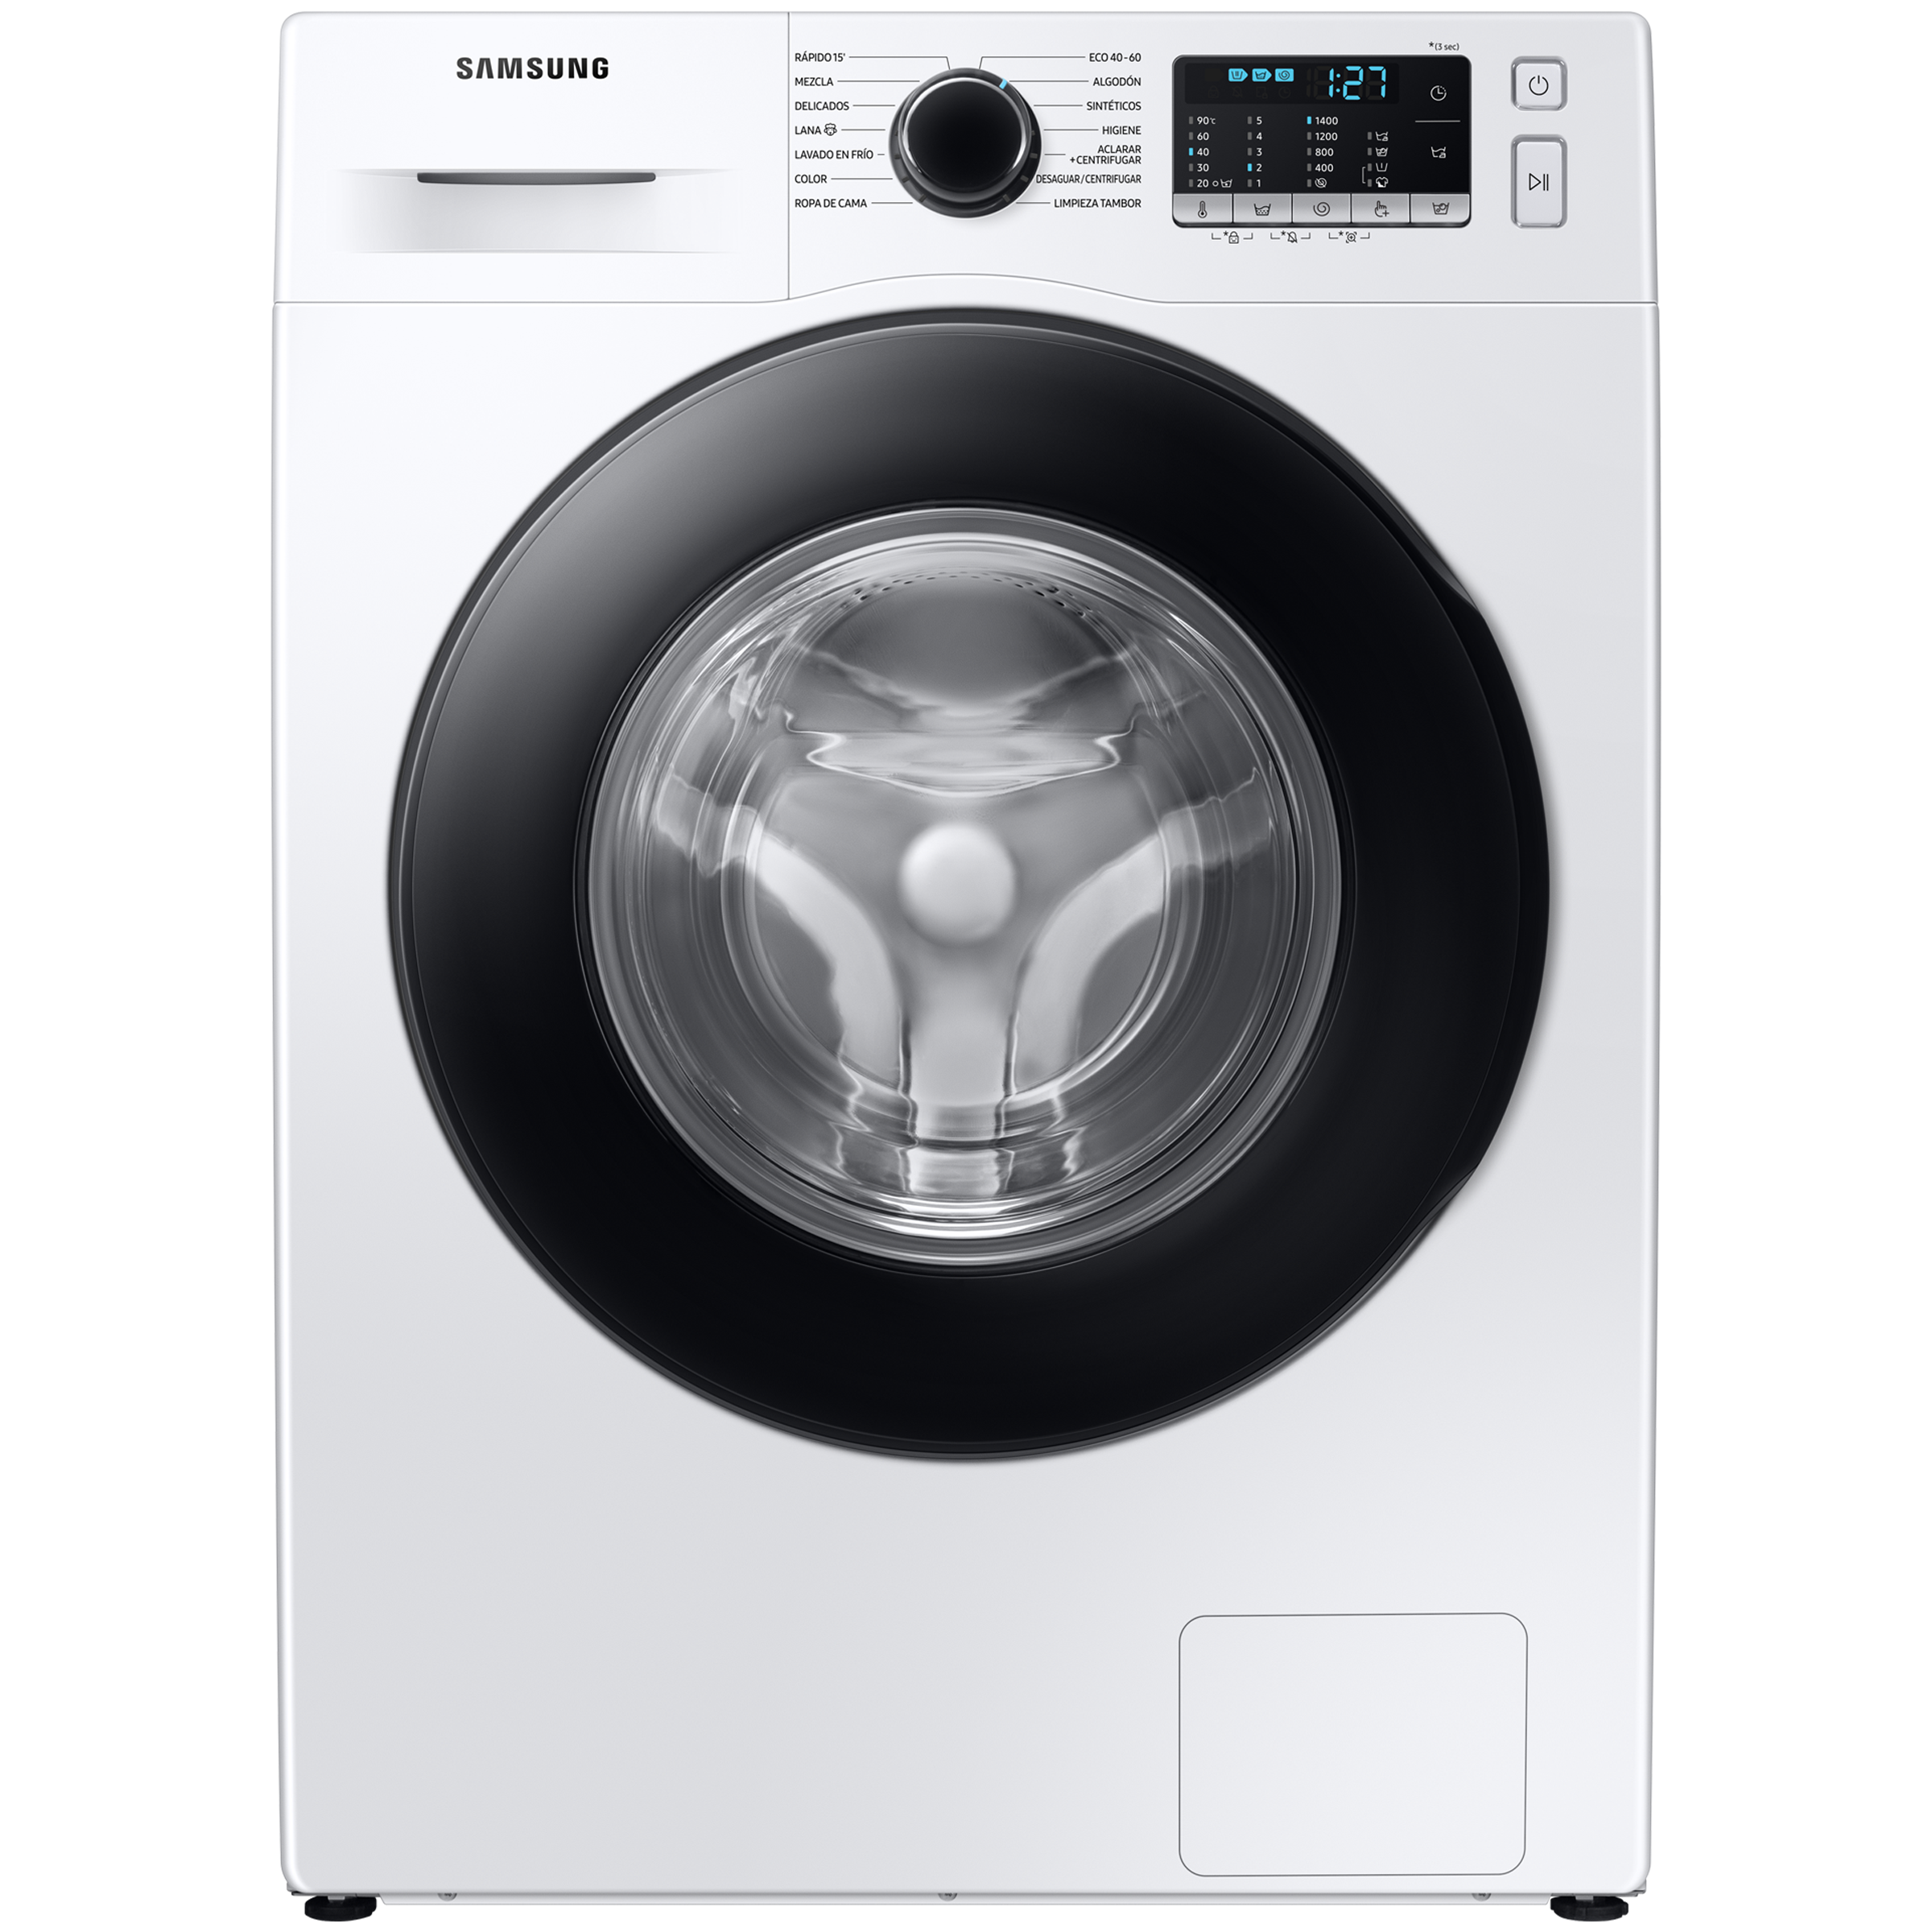 samsung - samsung 8 kg 5 Star Fully Automatic Front Load Washing Machine (Eco Bubble Technology, WW80TA046AE/TL, White)